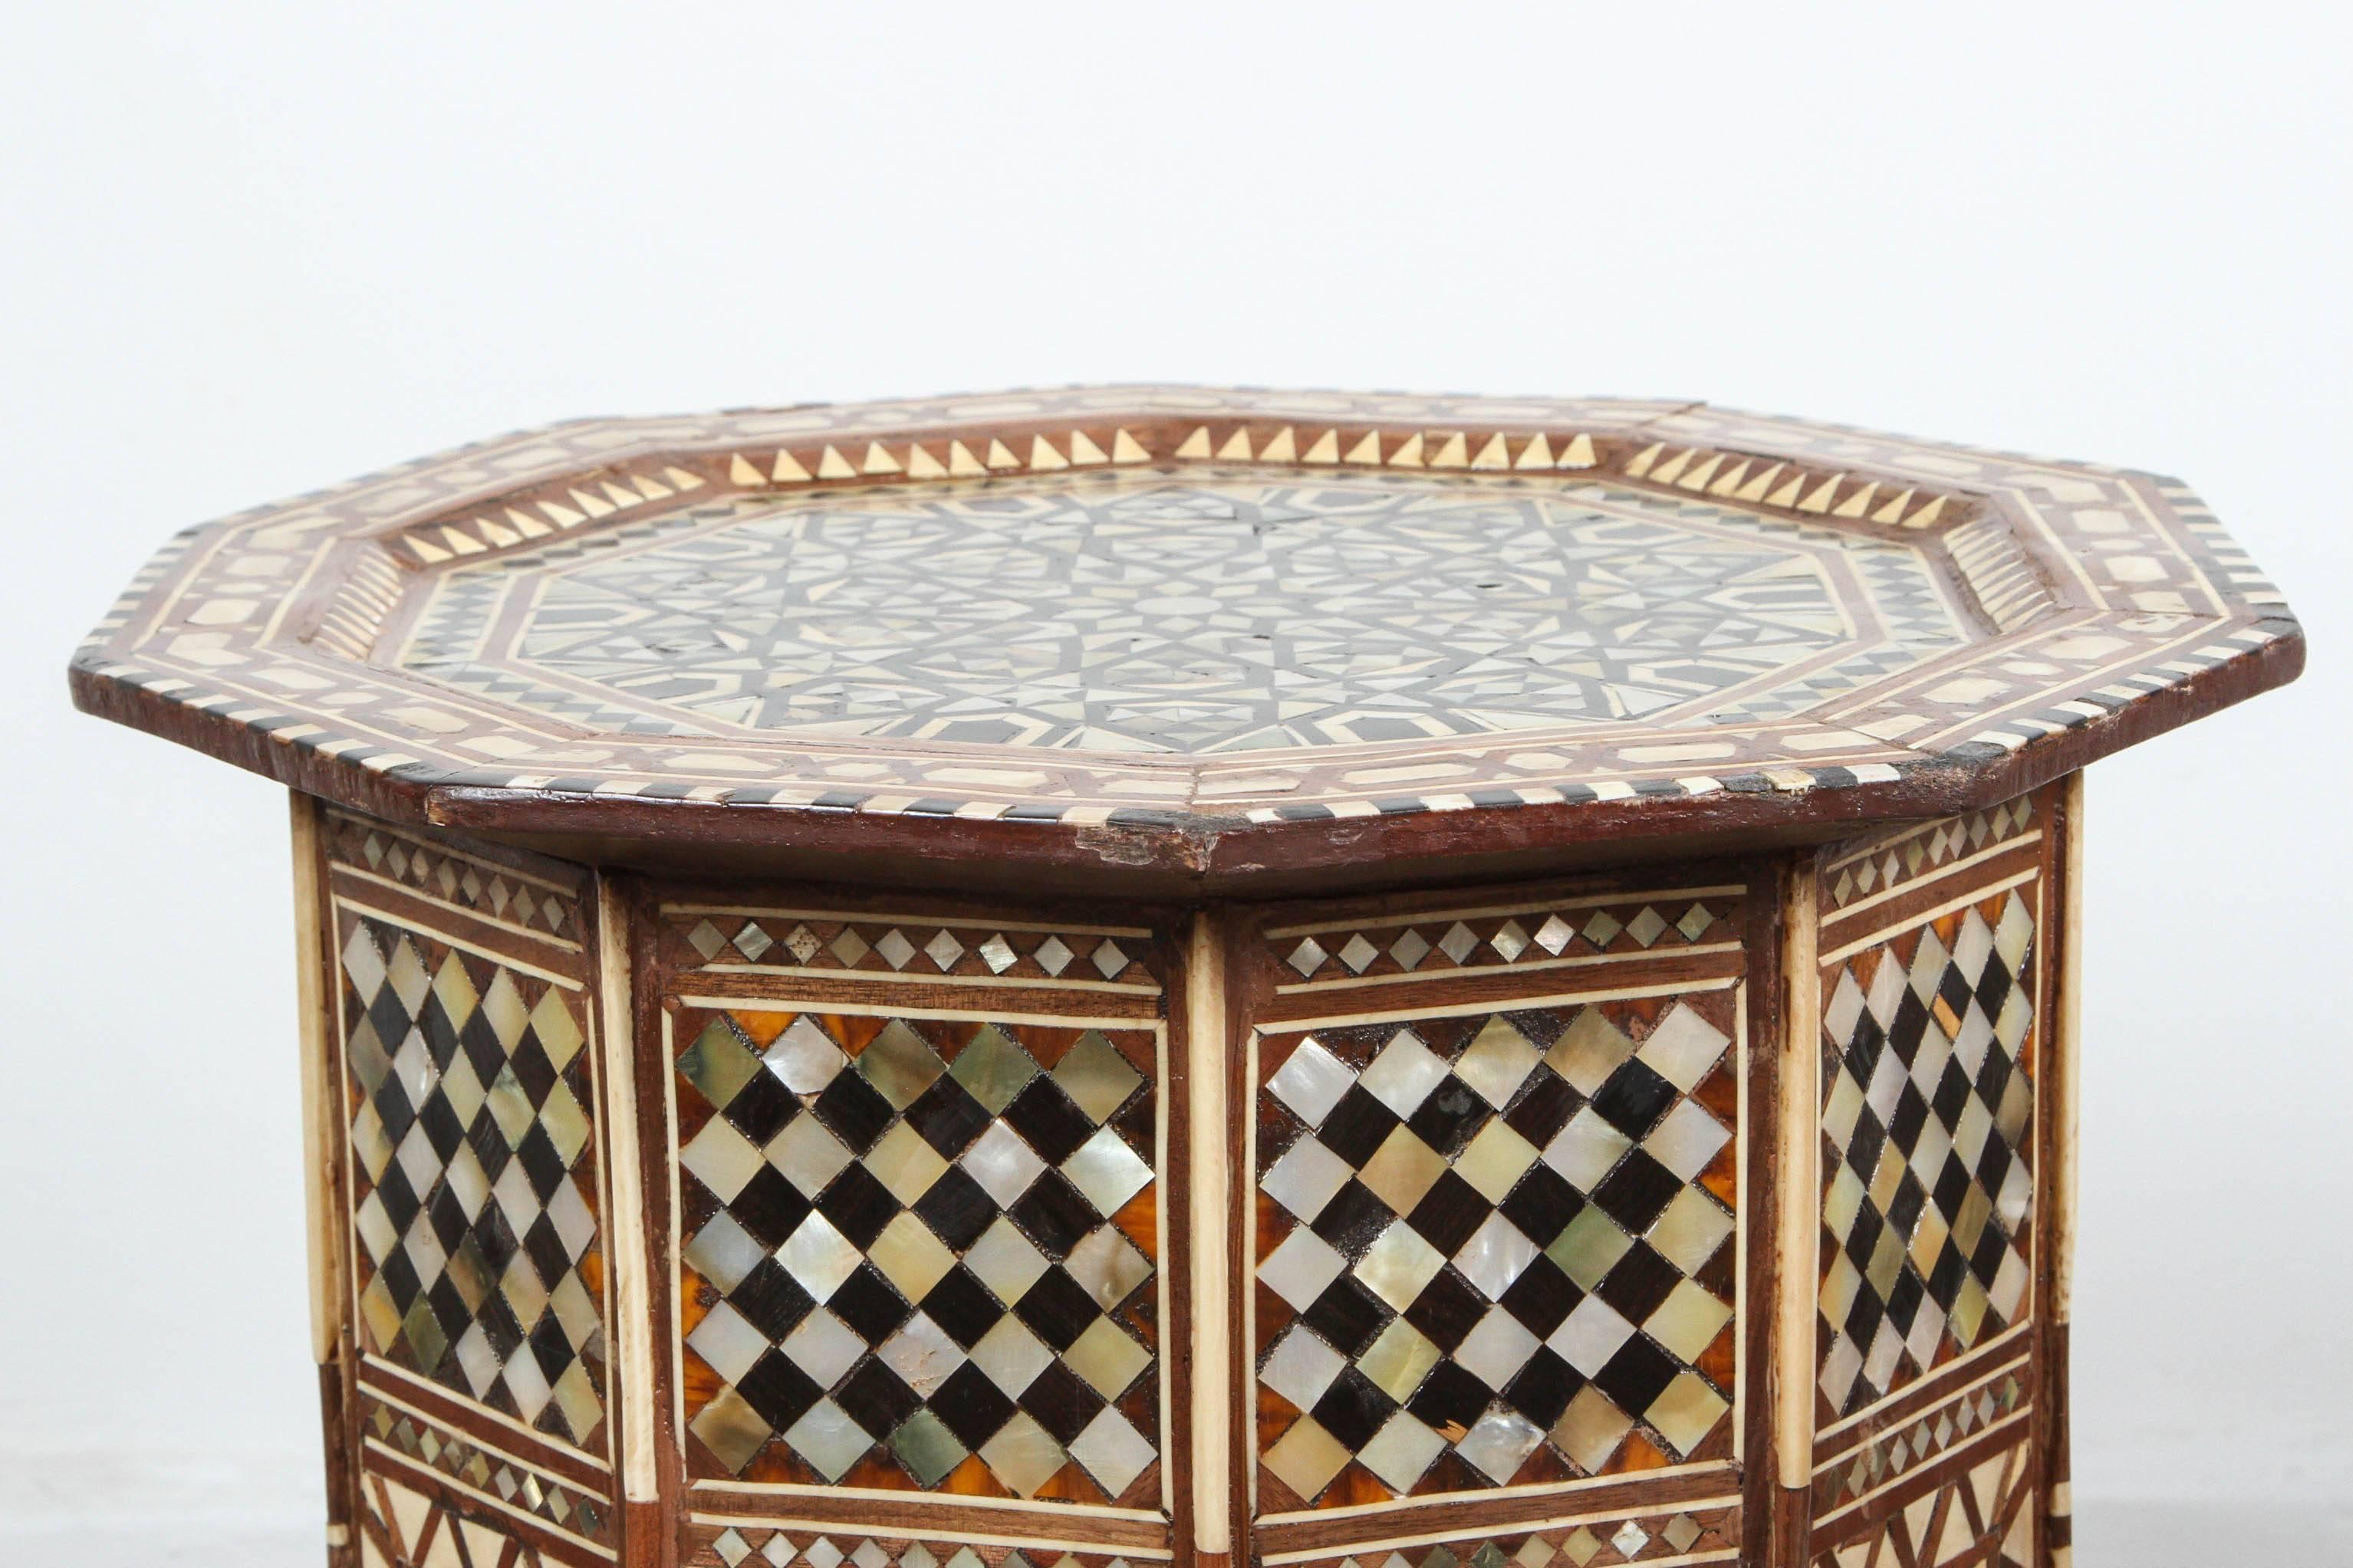 Hand-Crafted Syrian Octagonal tables Inlaid with Mother-of-Pearl